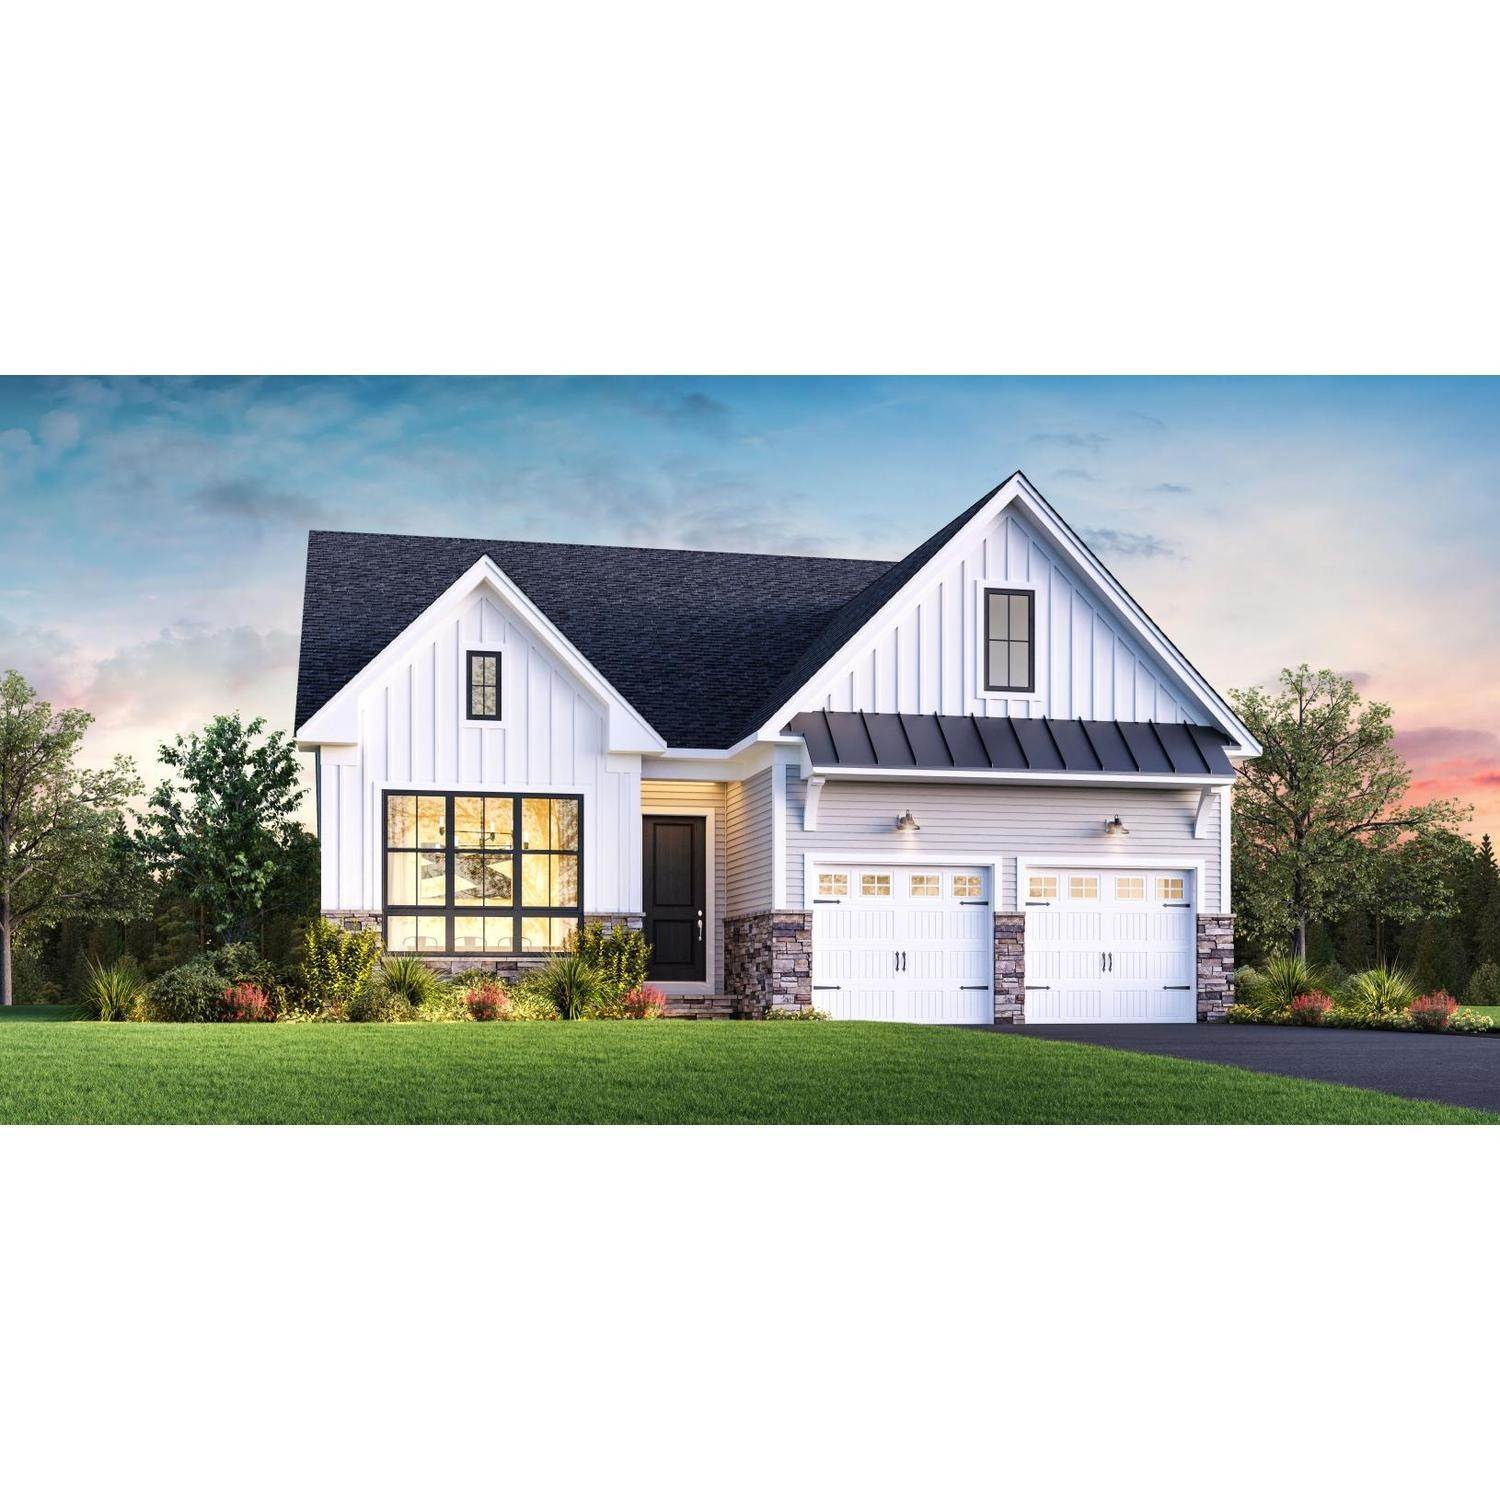 Single Family for Sale at Enclave At Tyngsborough 9 Evergreen Way, Tyngsborough, MA 01879